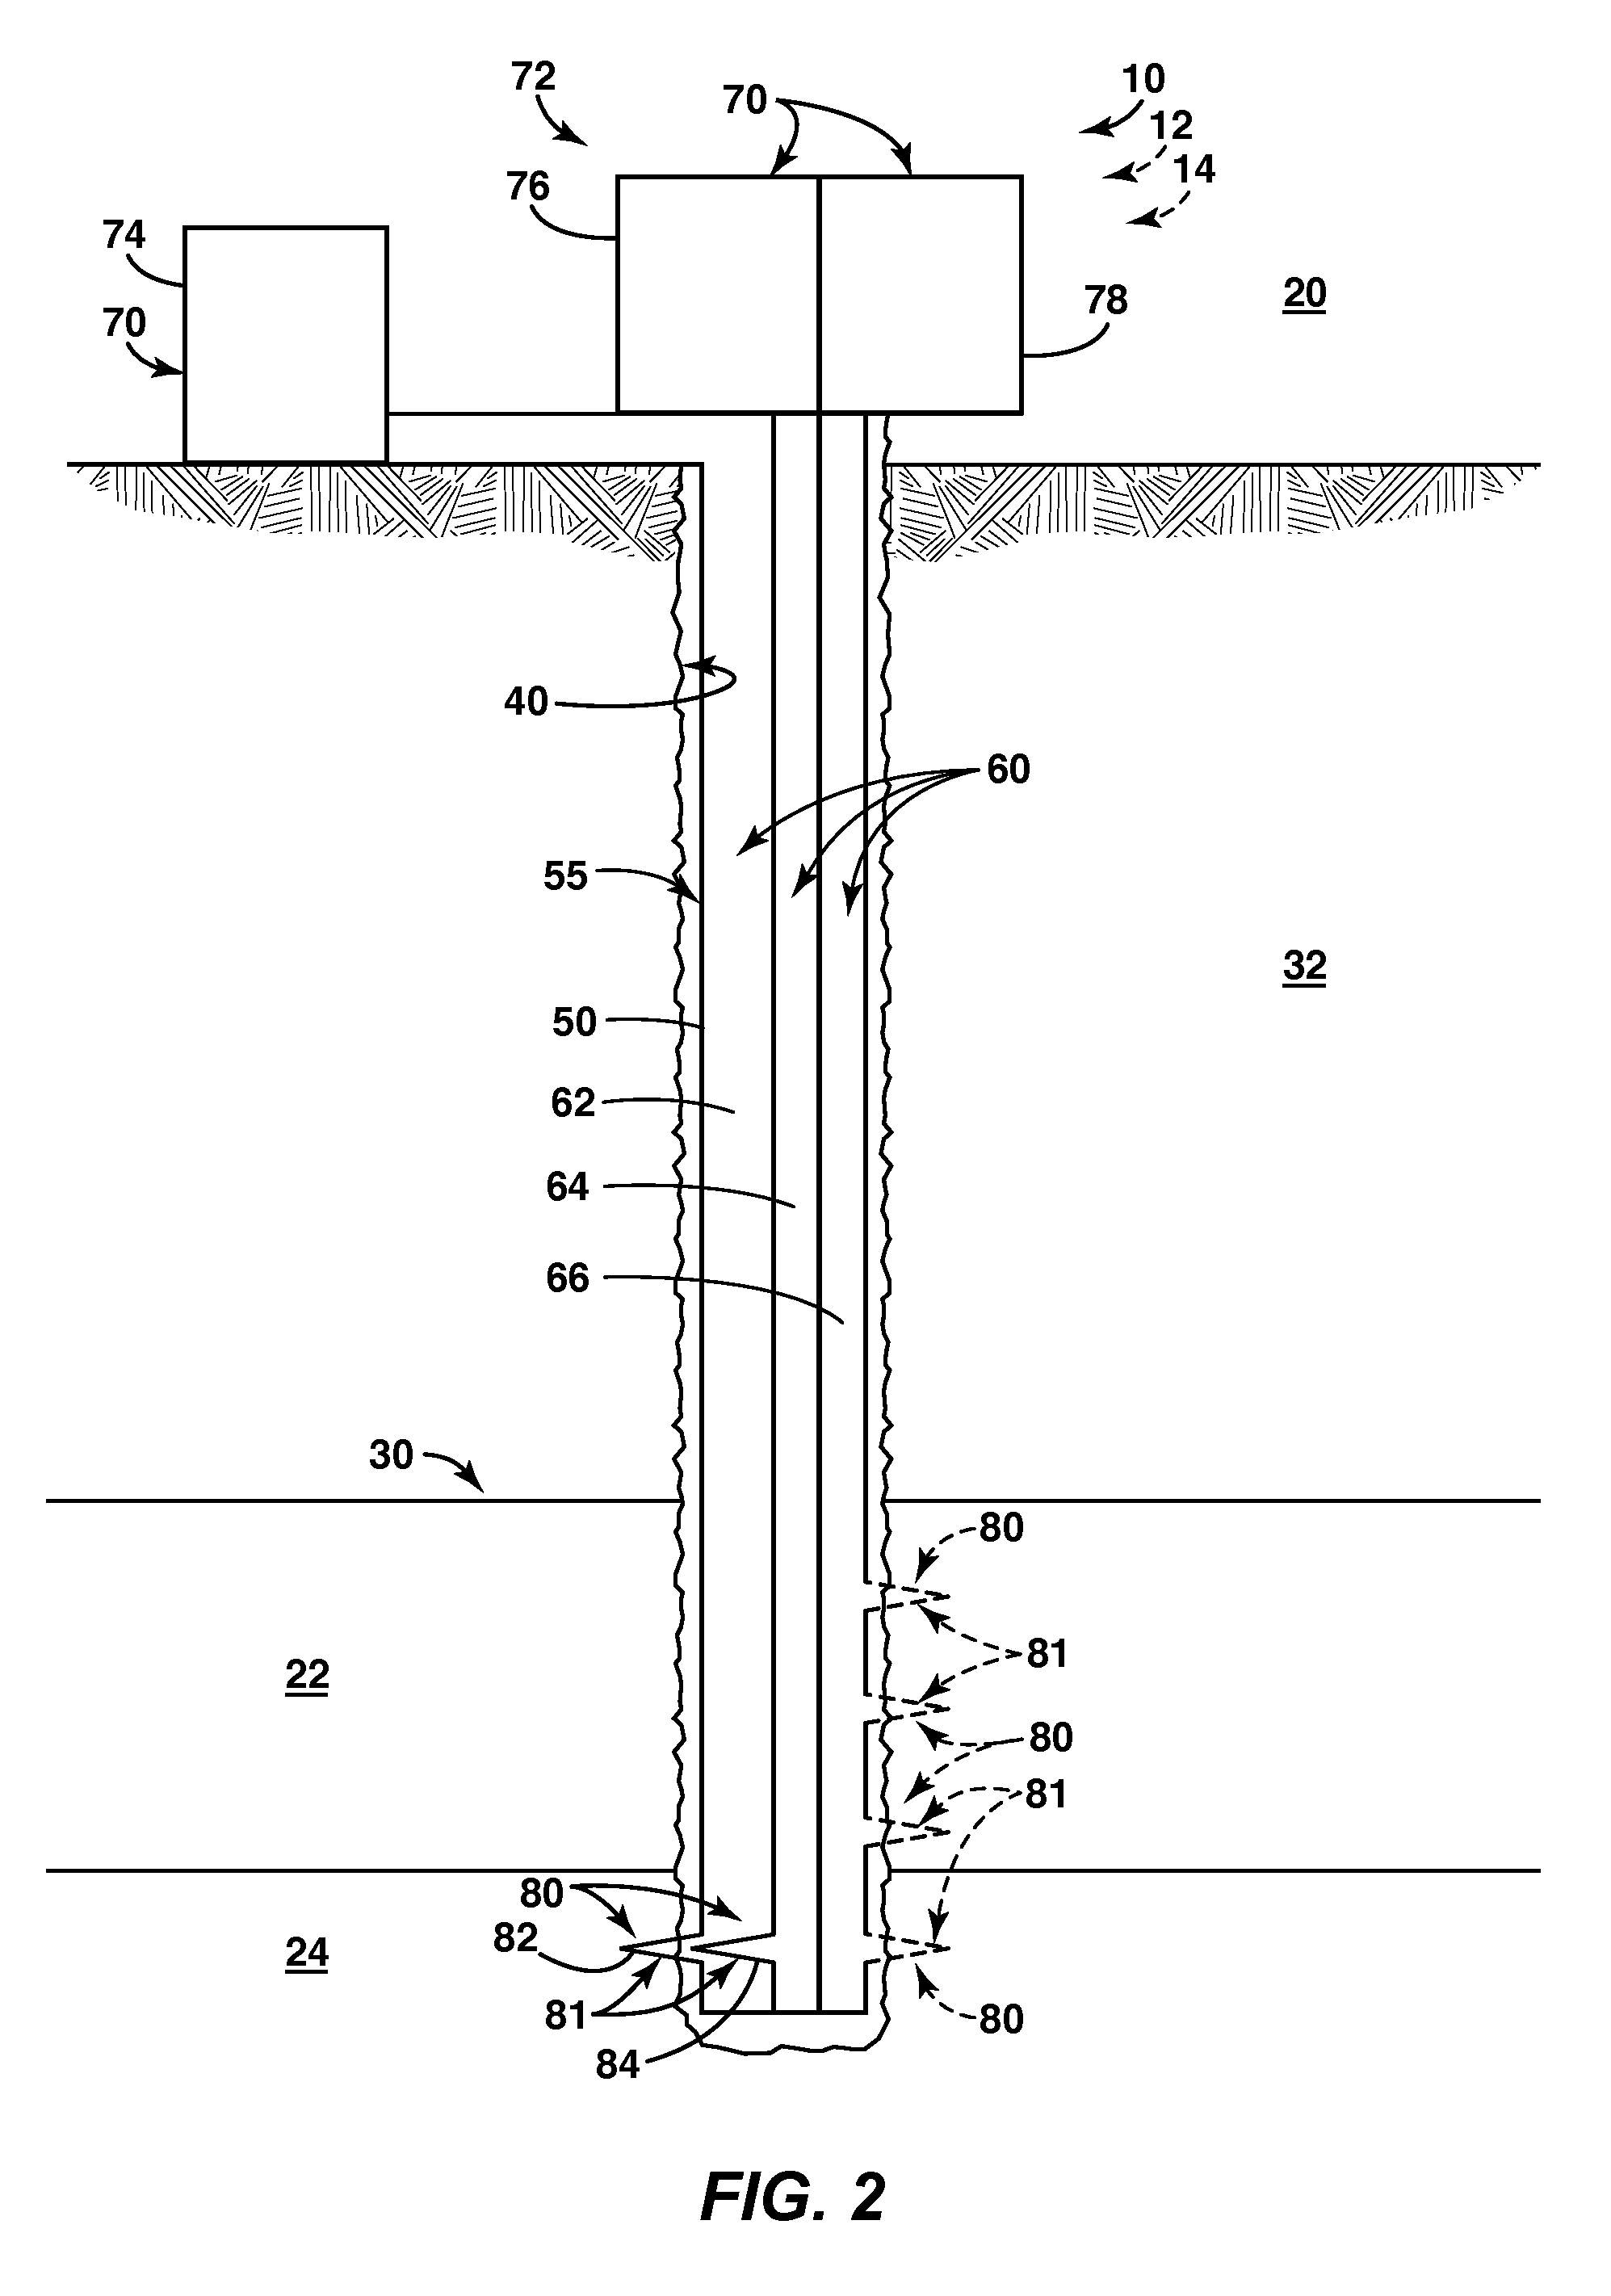 Systems and methods for advanced well access to subterranean formations